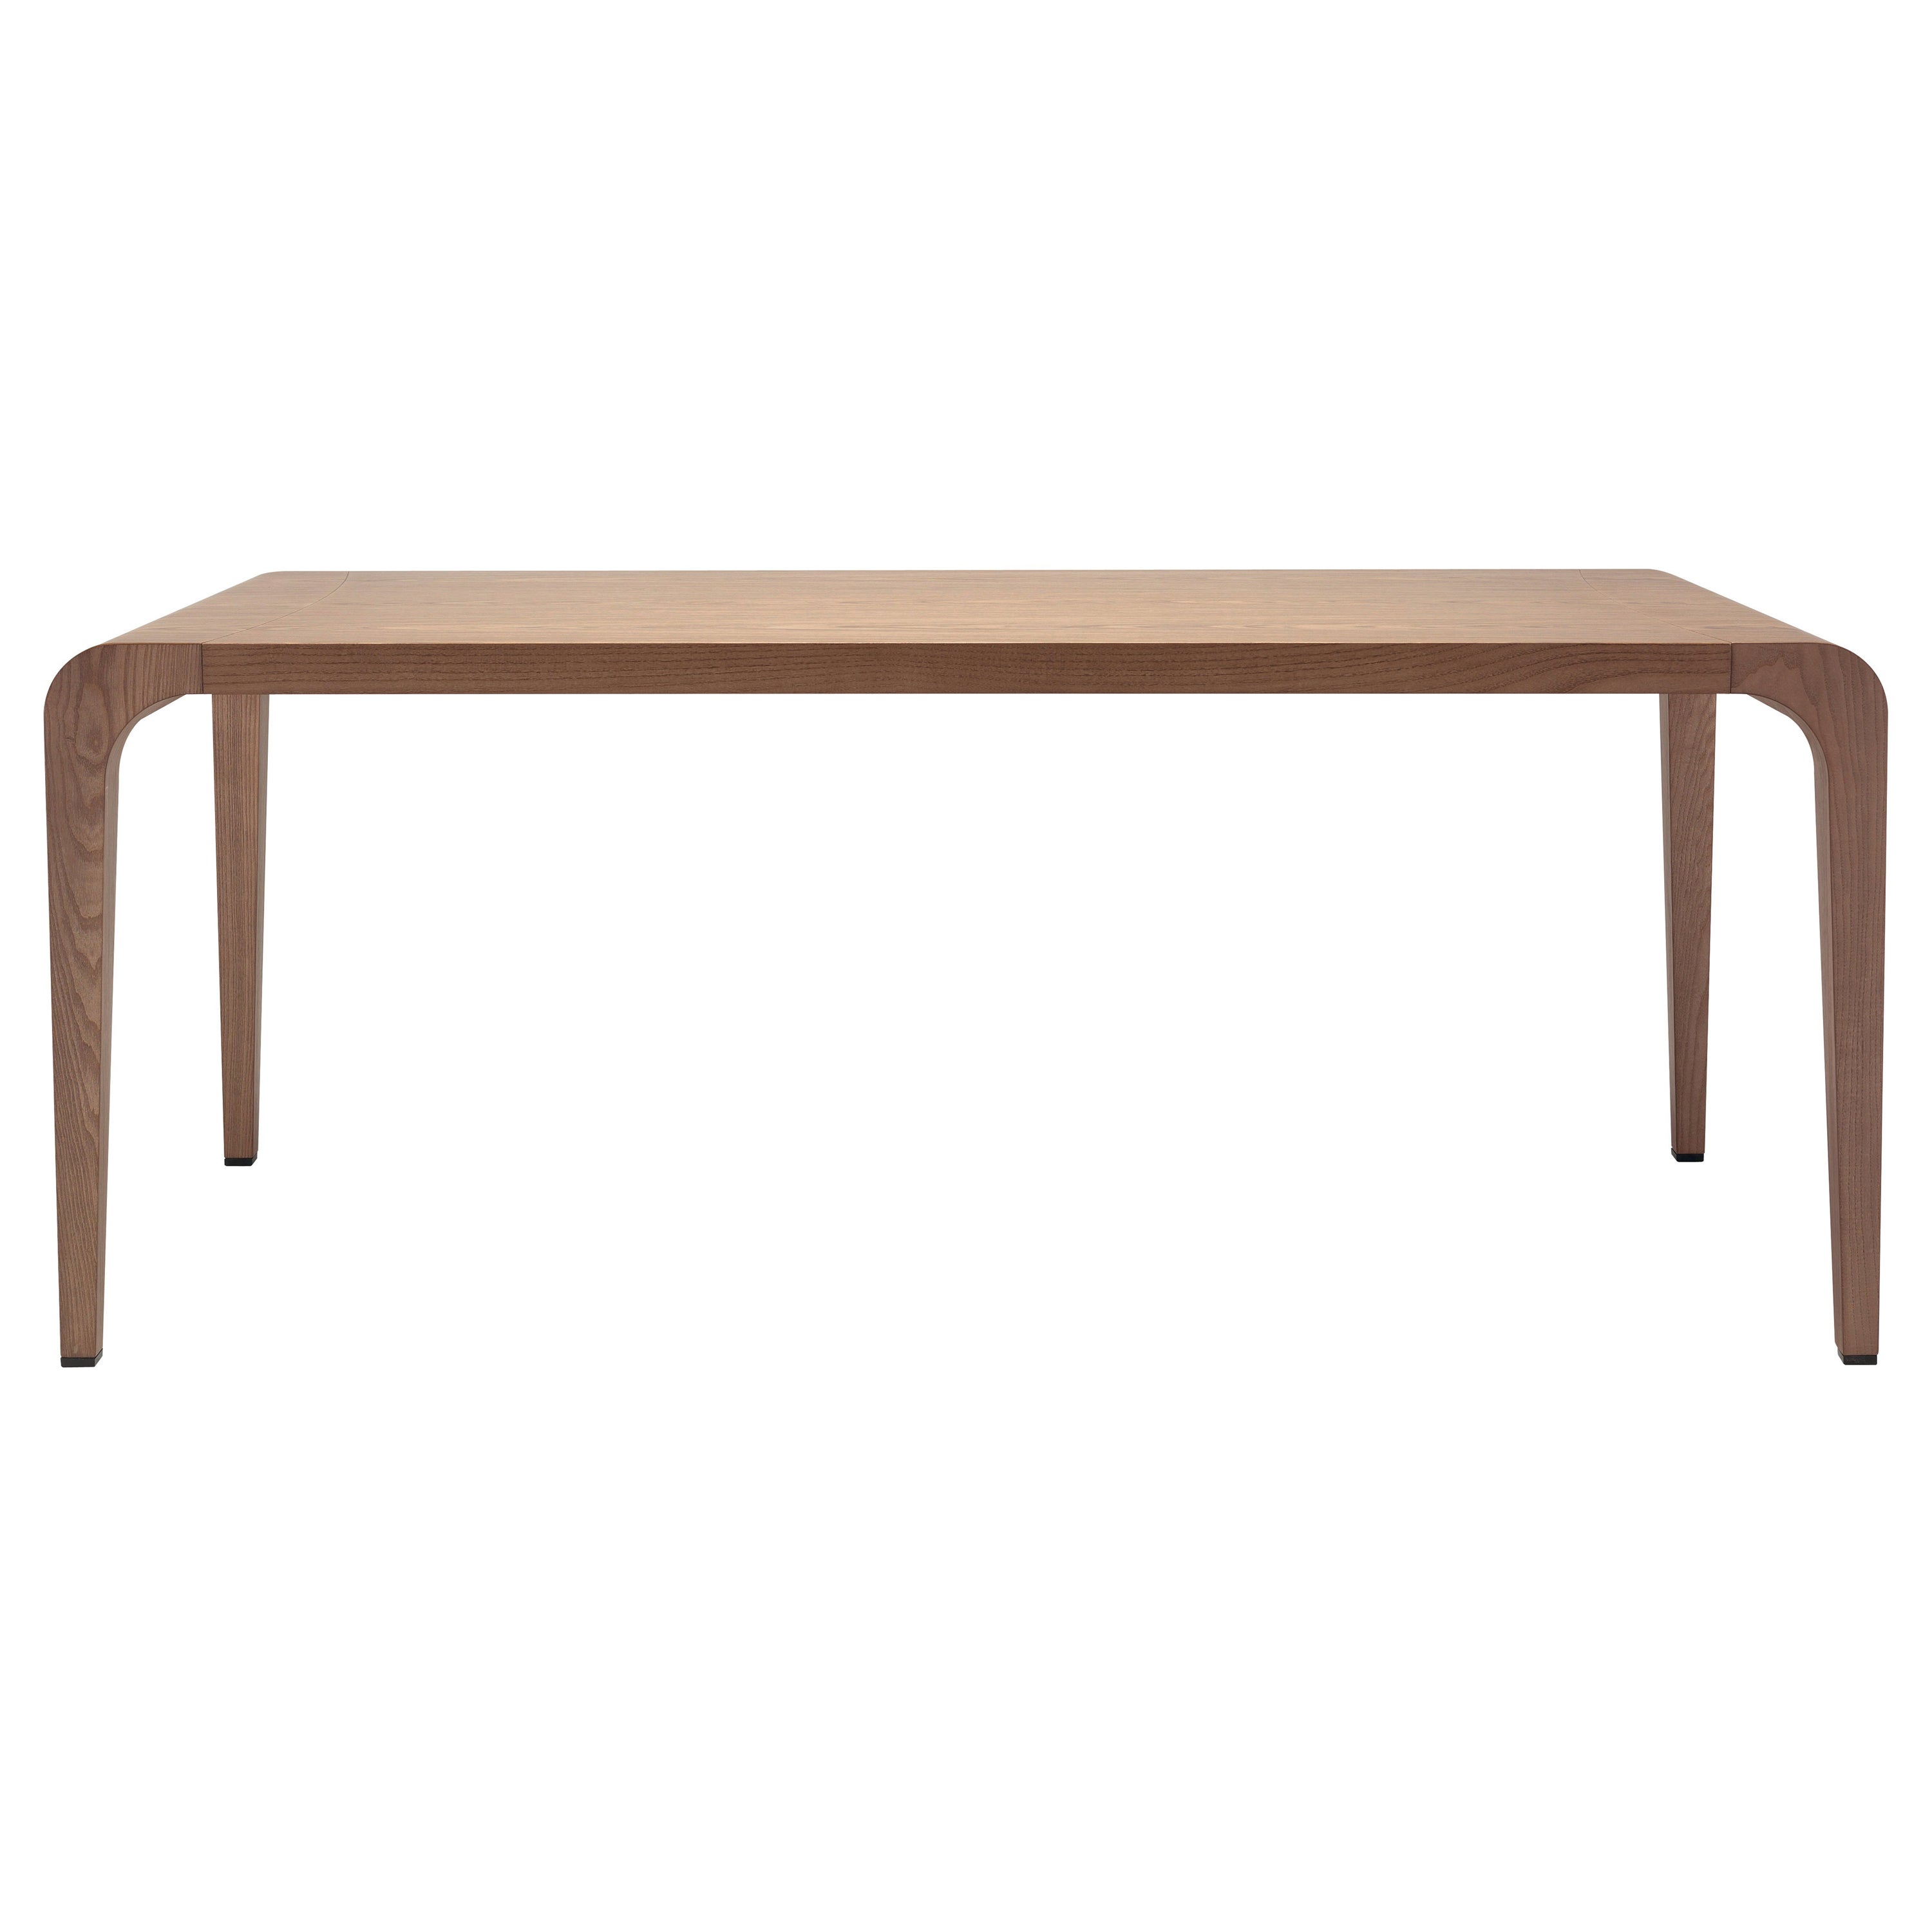 Alias Medium 390 Ilvolo Table in Oak Canaletto Walnut Wood Top and Frame For Sale